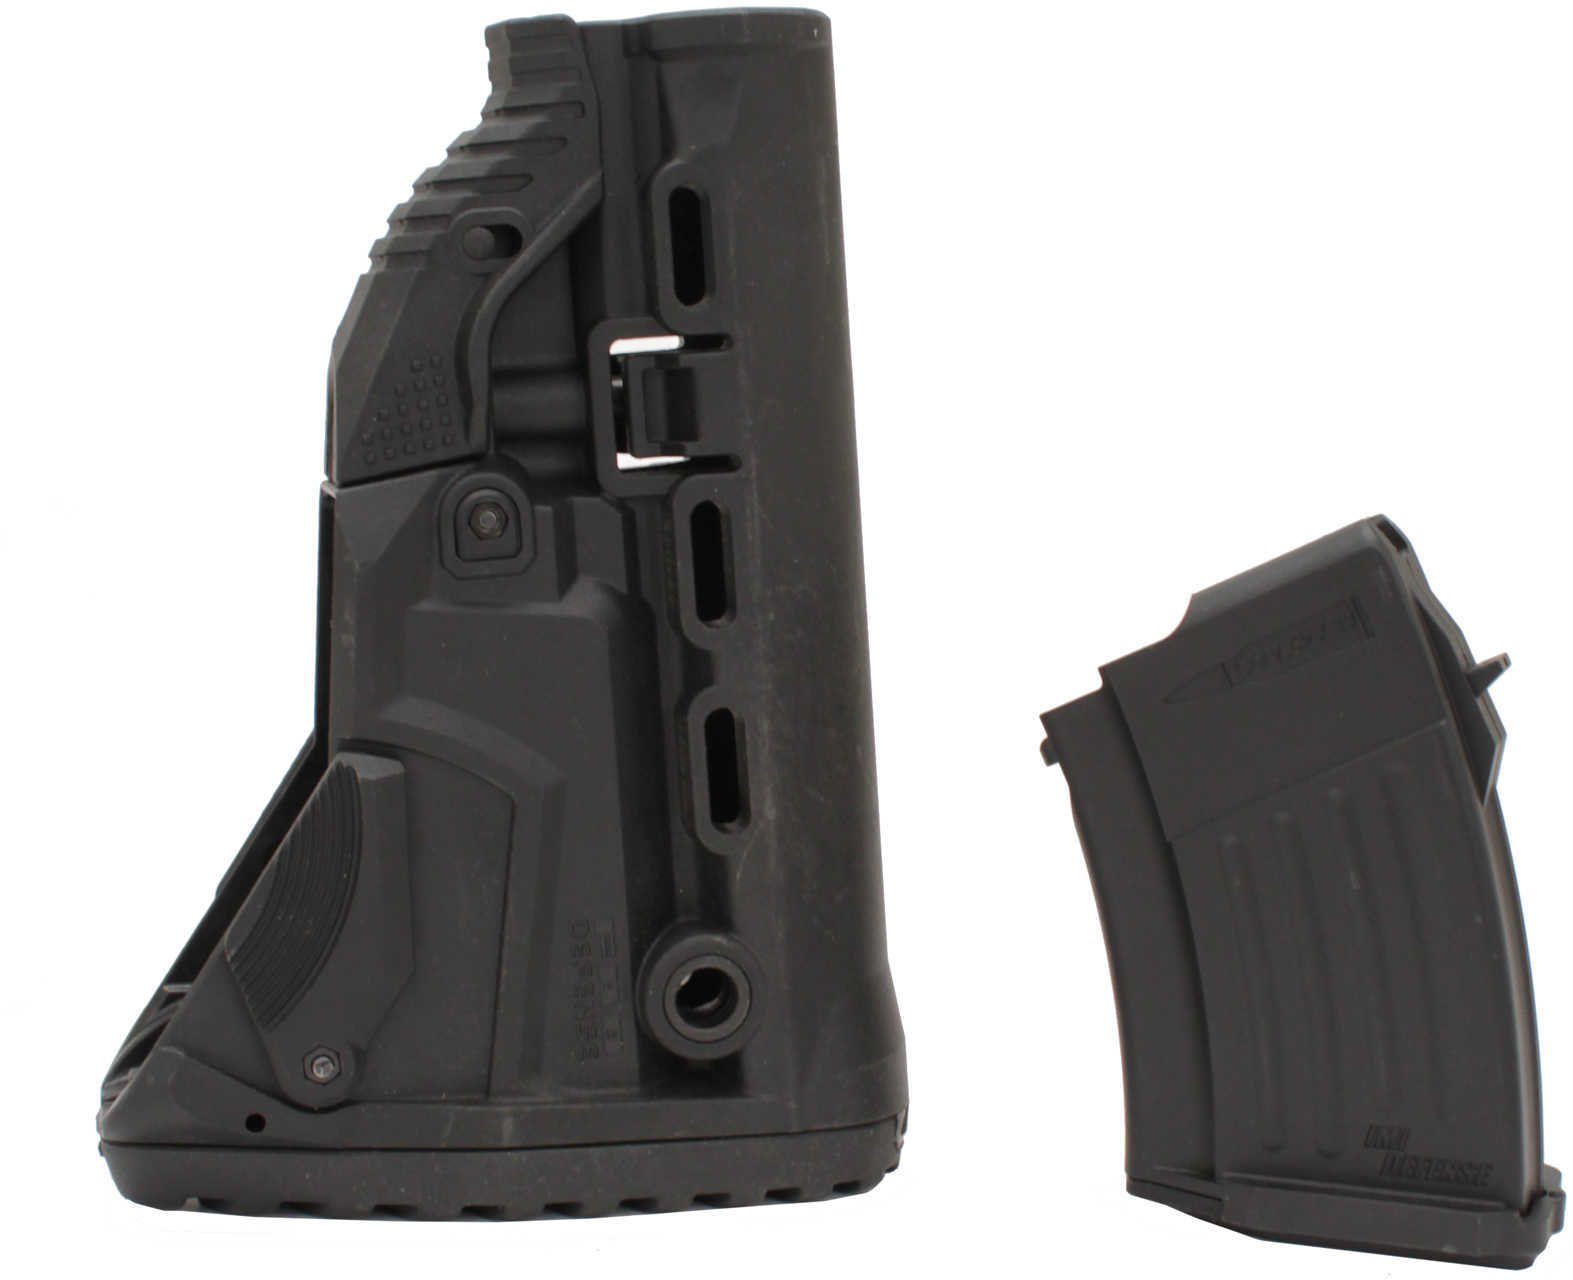 FAB Defense Stock Fits AK-47 Survival Buttstock with Built-in 10 round Mag Carrier Black Finish GK-MAG